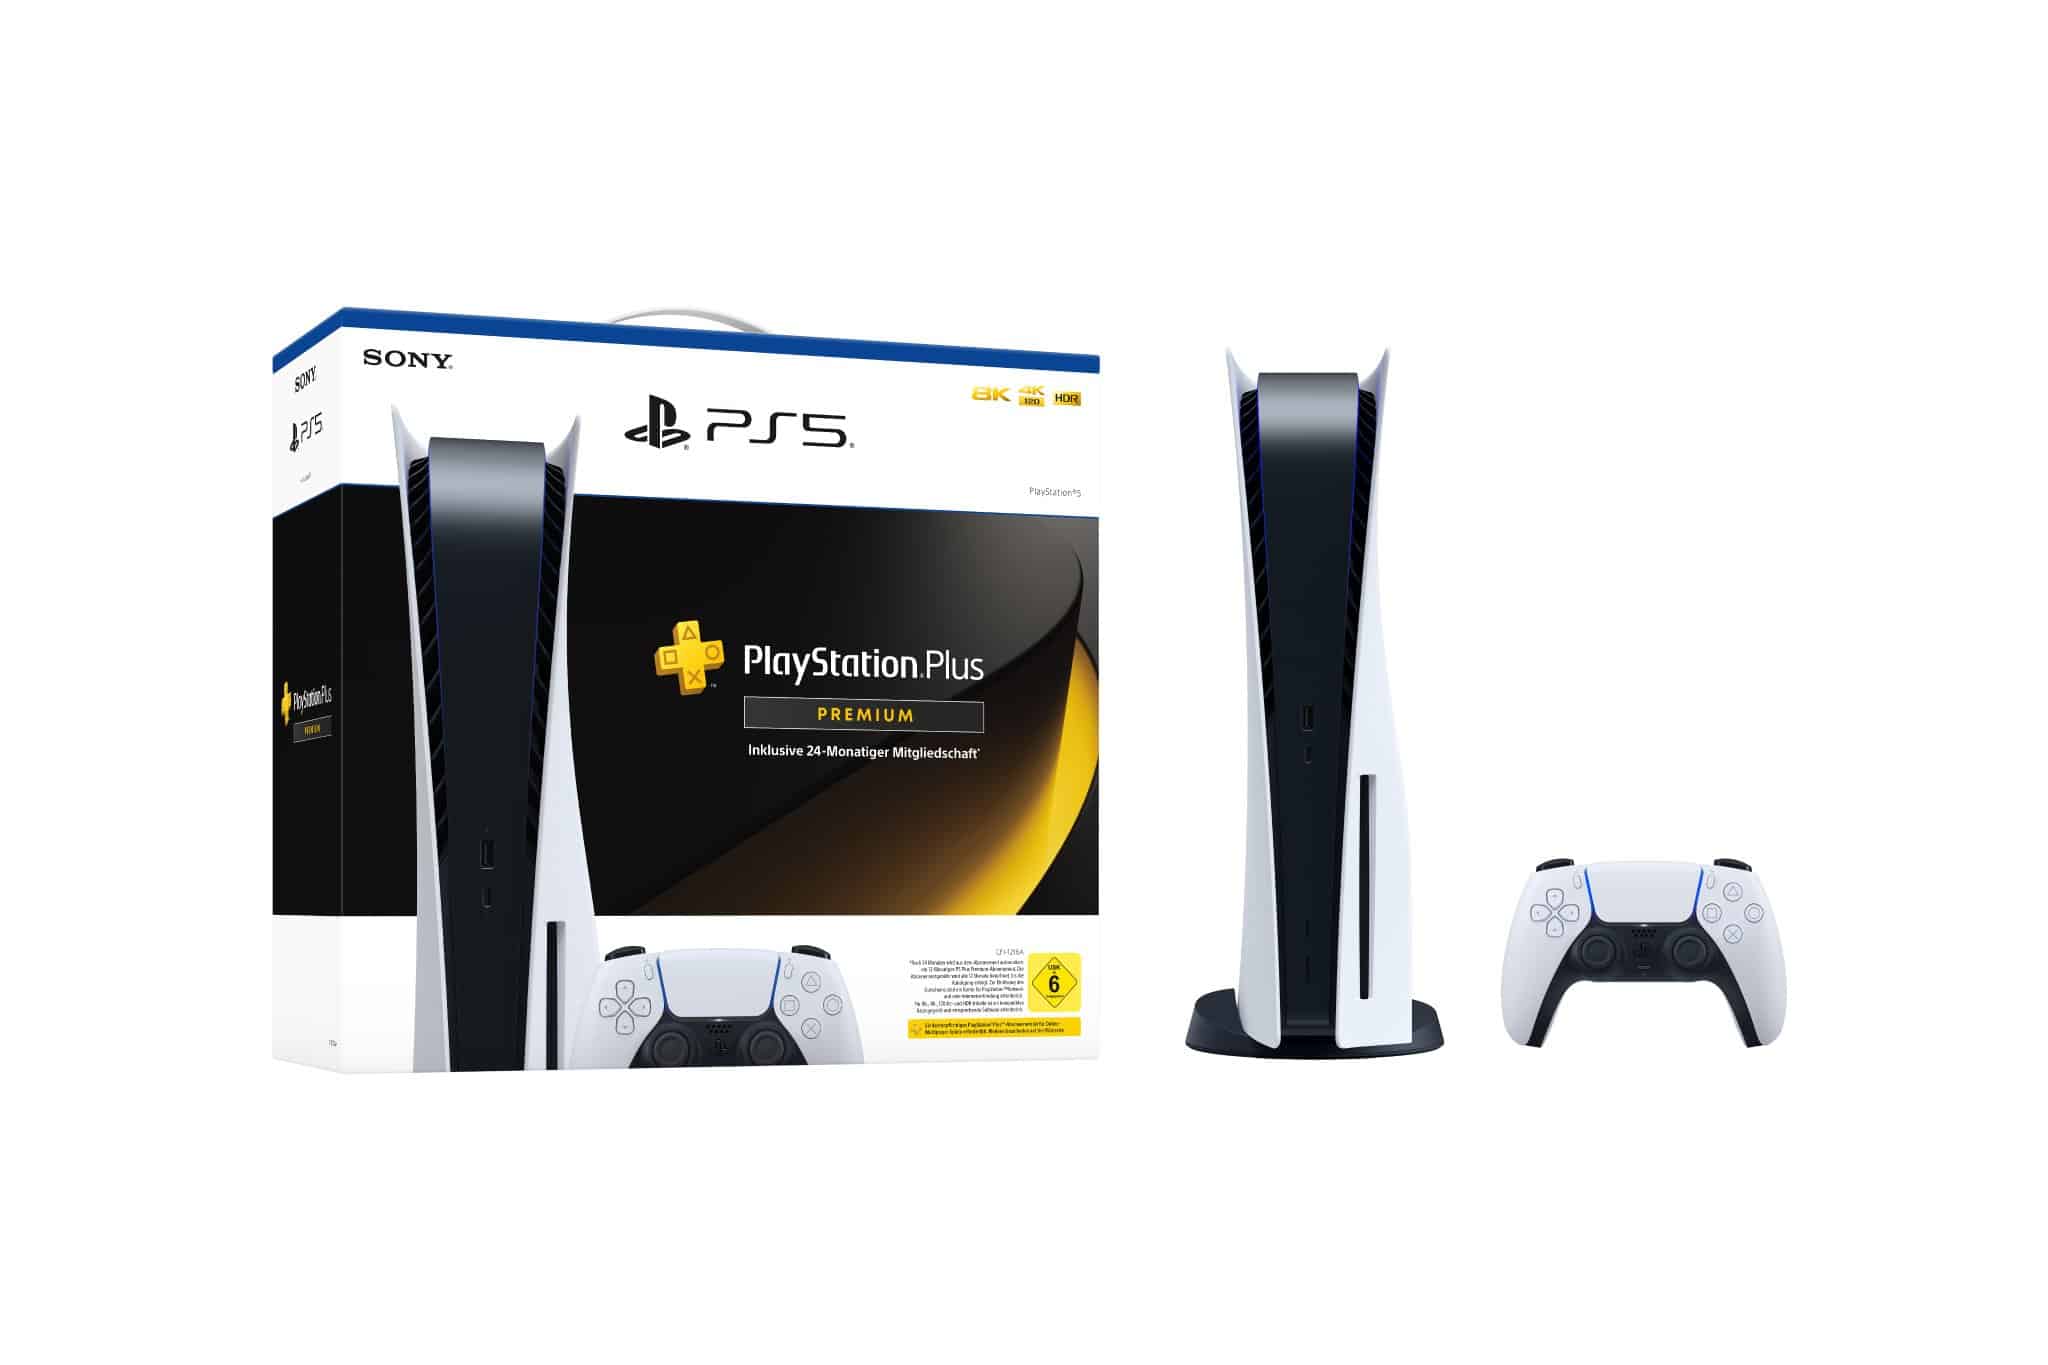 Rumor: PlayStation 5 and 24 Months PlayStation Plus Premium Bundle in the Works 2343